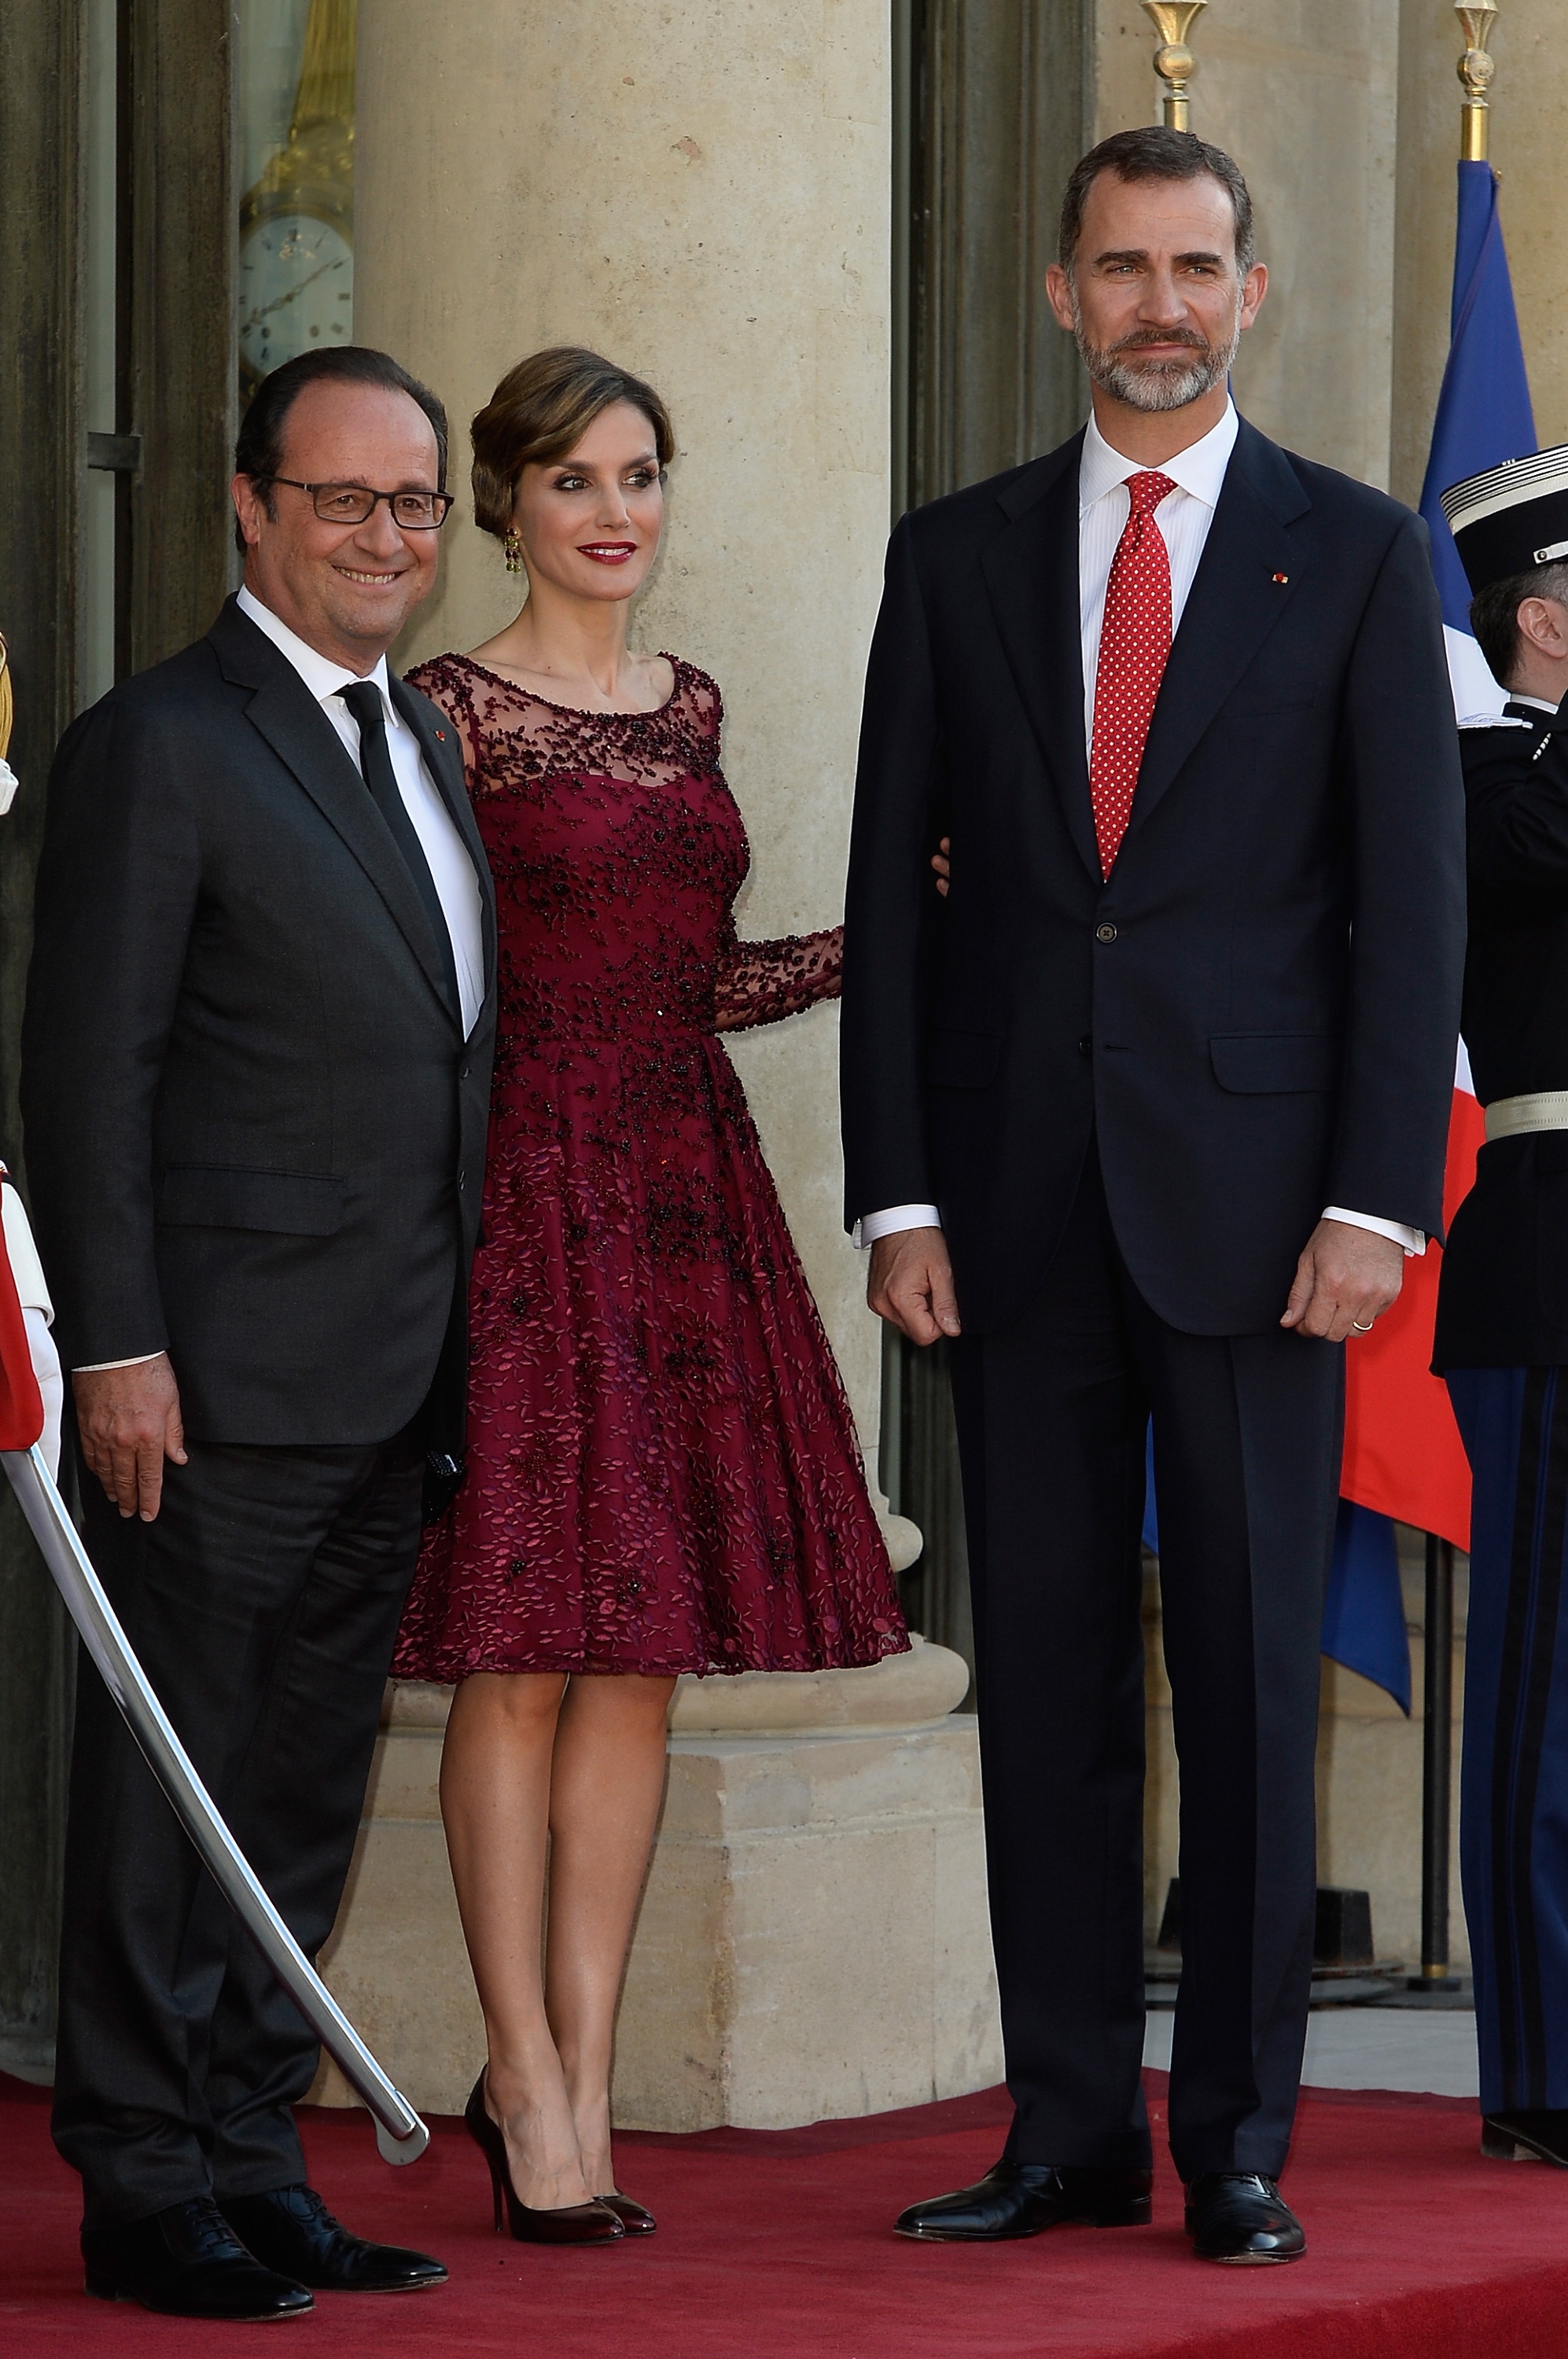 PARIS, FRANCE - JUNE 02:  (L-R) President of France Francois Hollande, Her Majesty The Queen Letizia of Spain and His Majesty The King Felipe VI of Spain arrive at the State Dinner offered by French President Francois Hollande at the Elysee Palace on June 2, 2015 in Paris, France.  (Photo by Pascal Le Segretain/Getty Images)